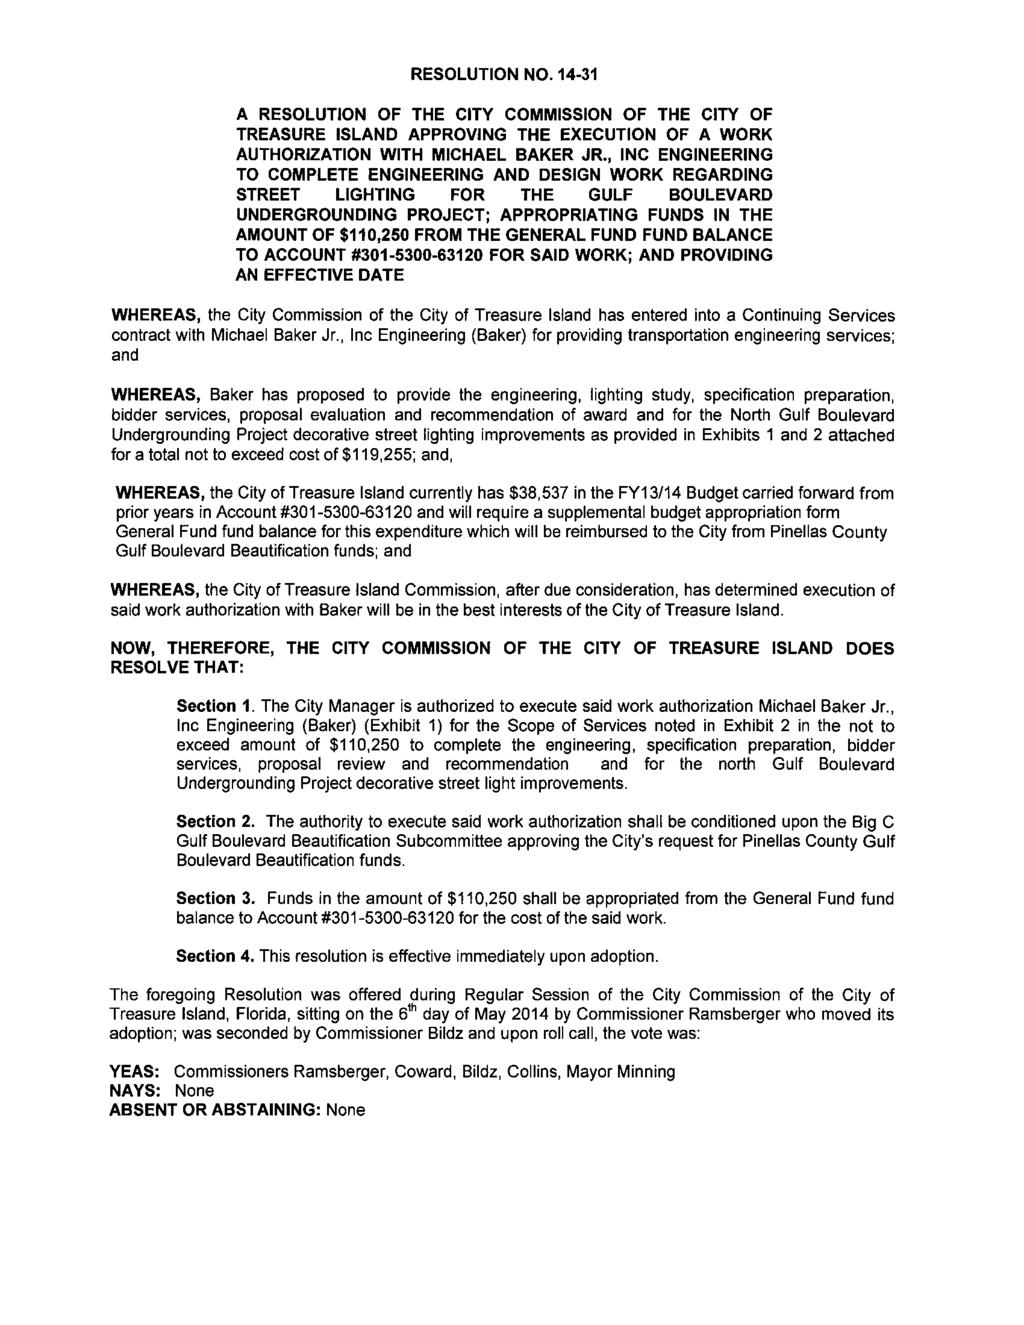 RESOLUTION NO. 14-31 A RESOLUTION OF THE CITY COMMISSION OF THE CITY OF TREASURE ISLAND APPROVING THE EXECUTION OF A WORK AUTHORIZATION WITH MICHAEL BAKER JR.